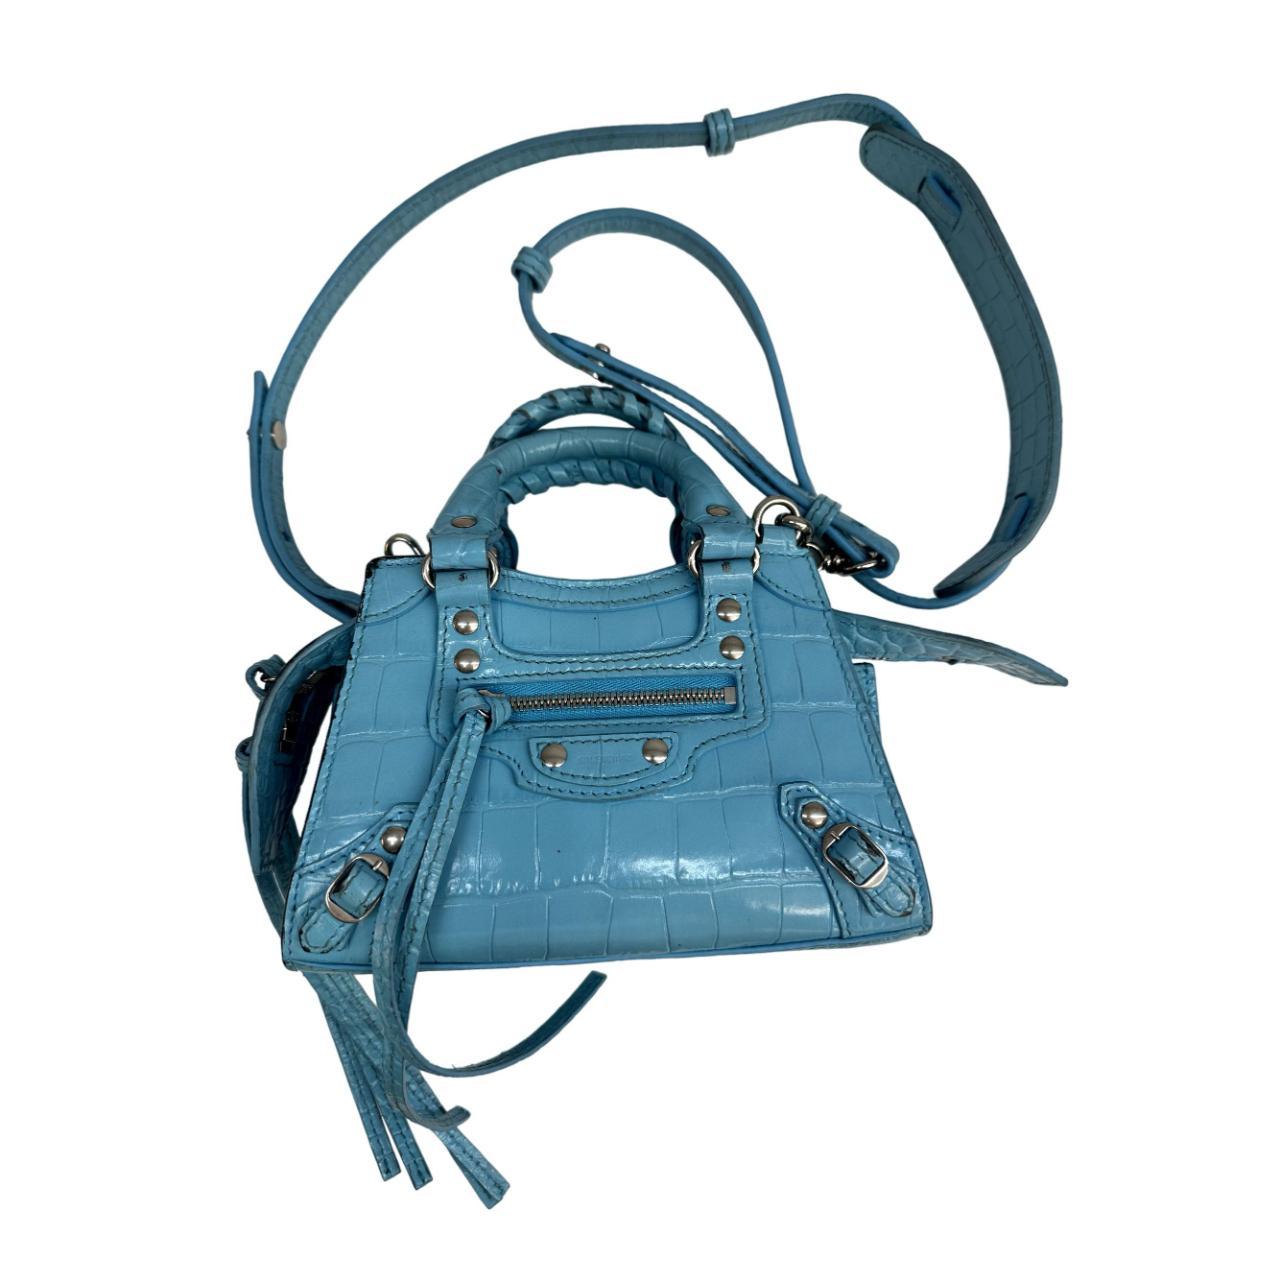 Balenciaga Small City Croc-embossed Leather Satchel in Blue